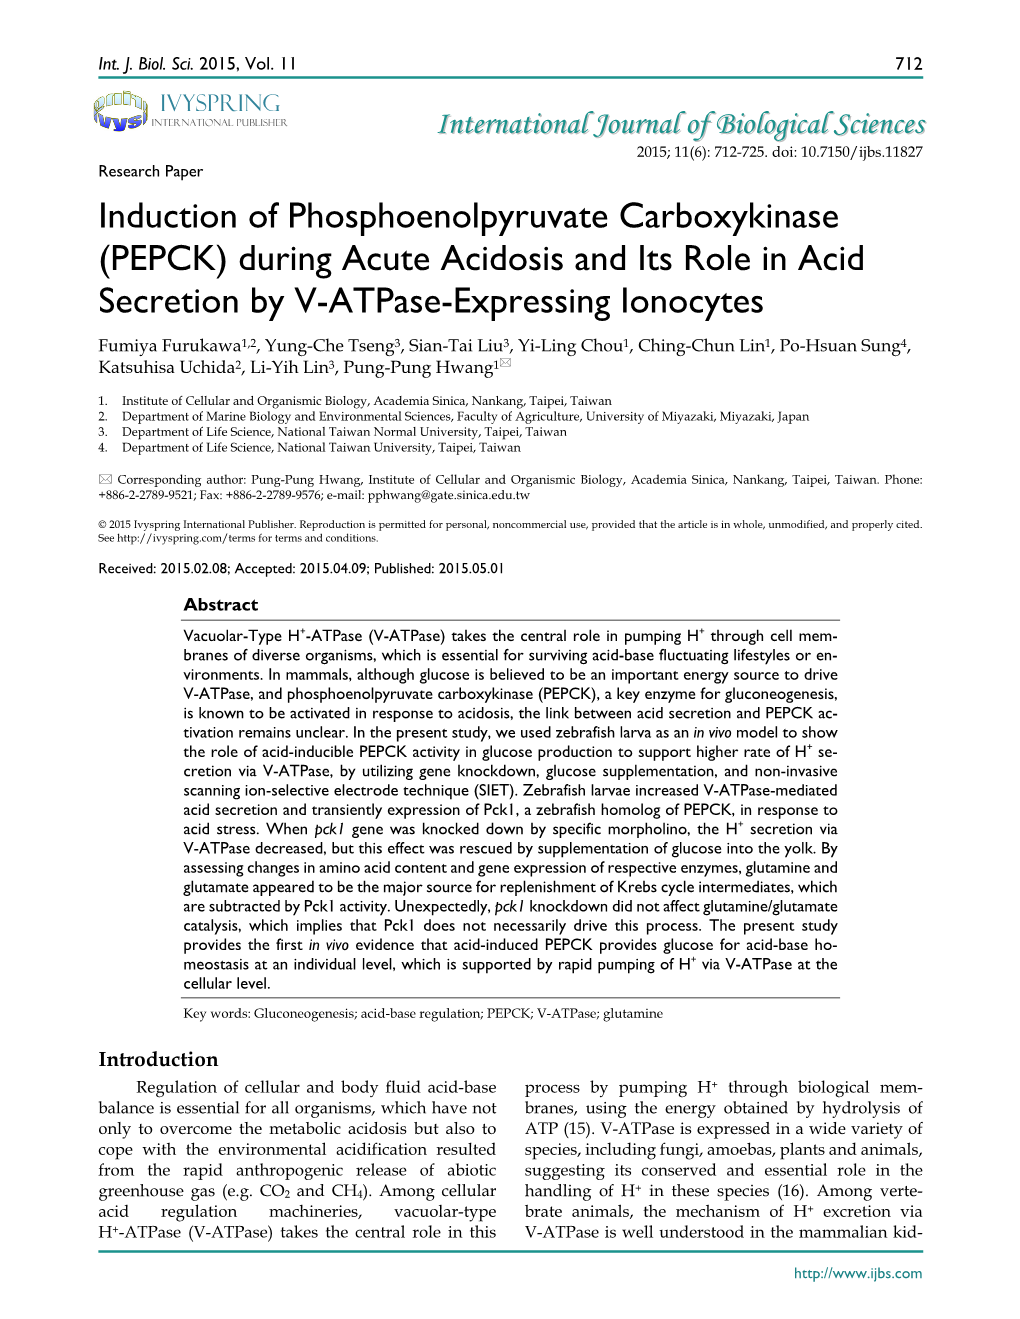 Induction of Phosphoenolpyruvate Carboxykinase (PEPCK) During